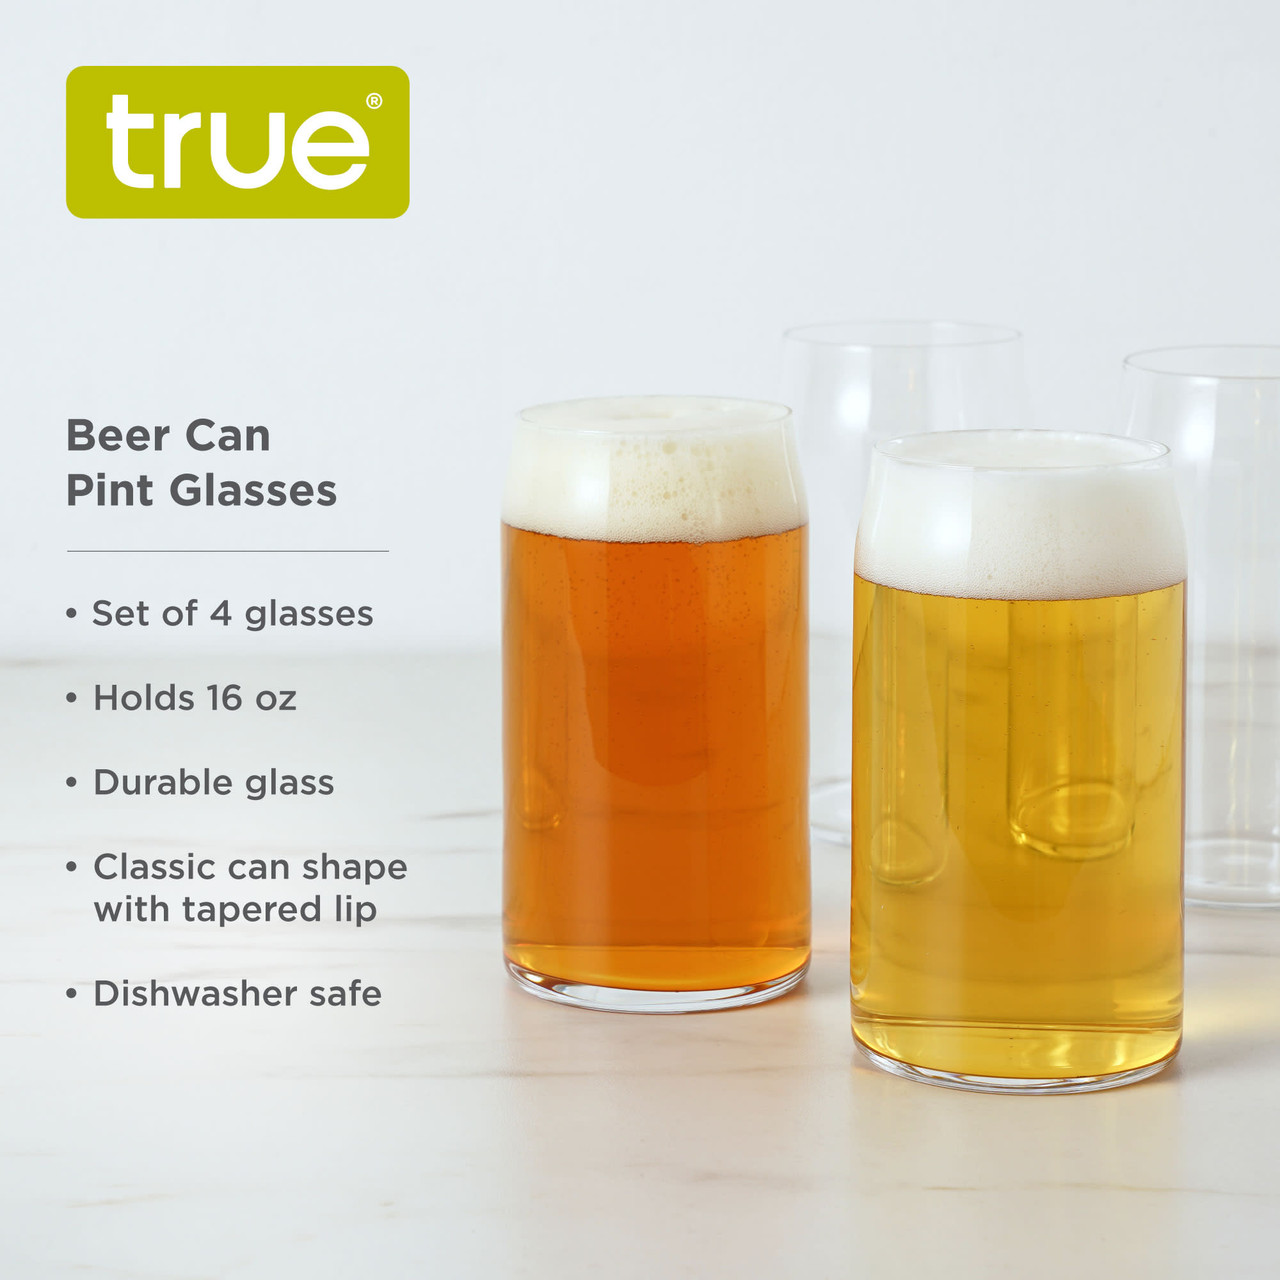 Beer Can Pint Glasses, Set of 4 by True